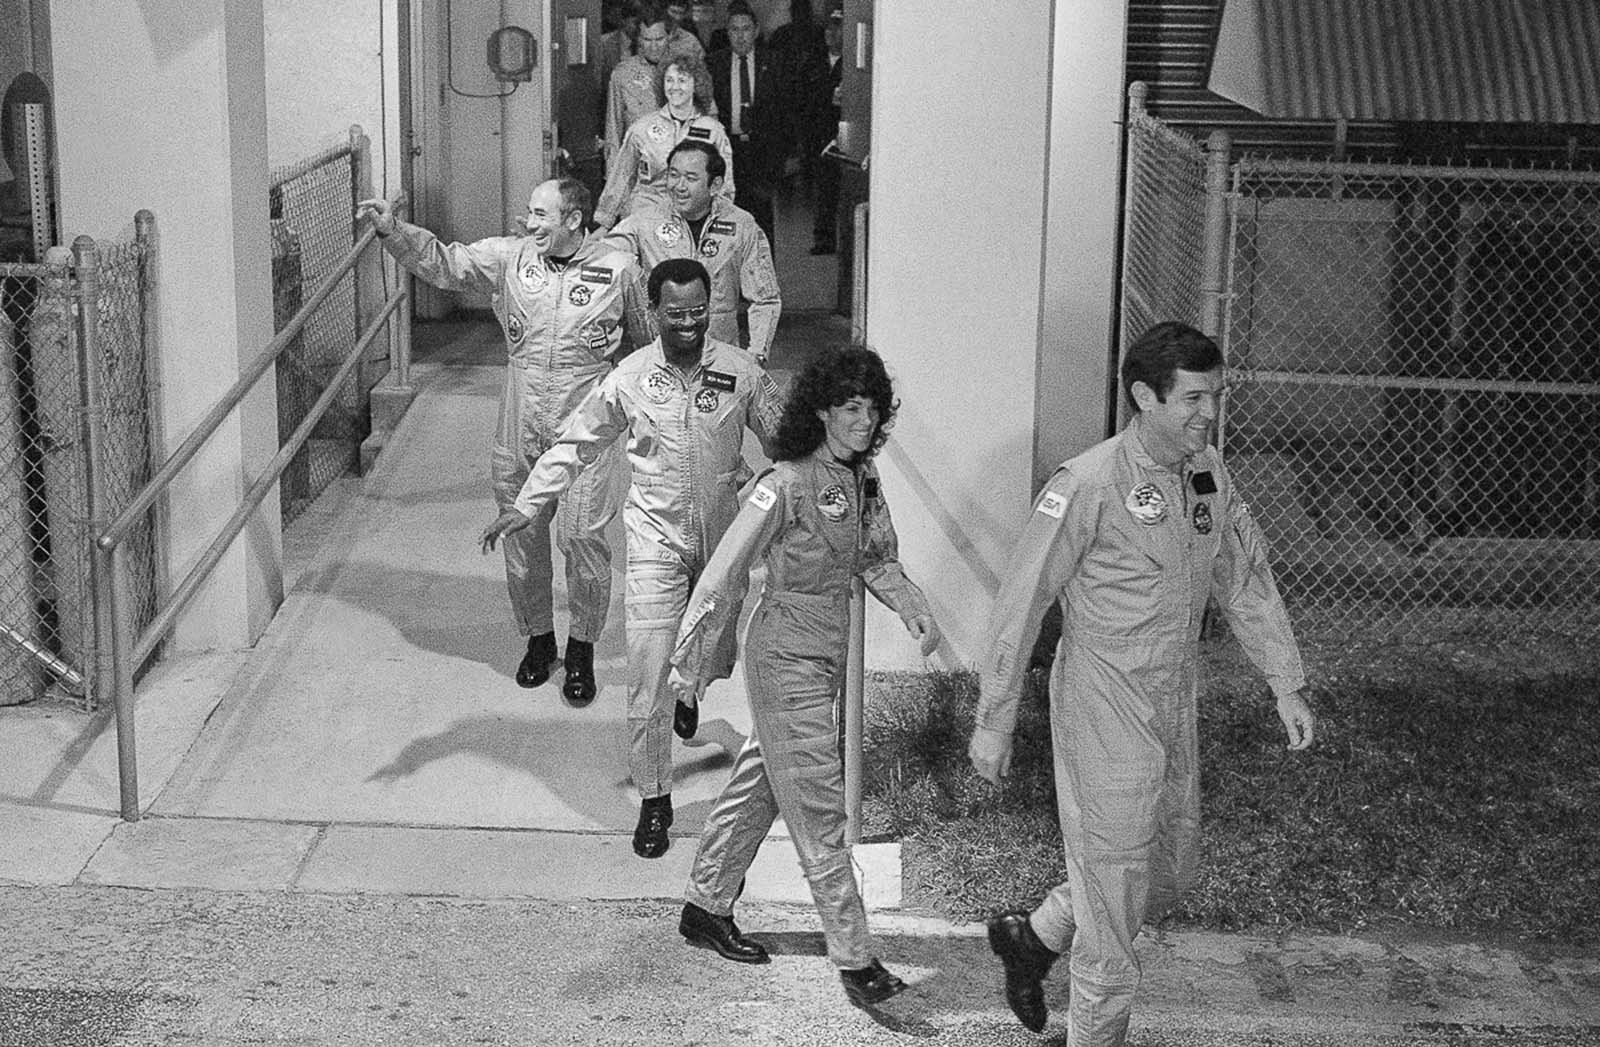 The crew of the Challenger leave their quarters on their way to the launch pad. Jan. 27, 1986.